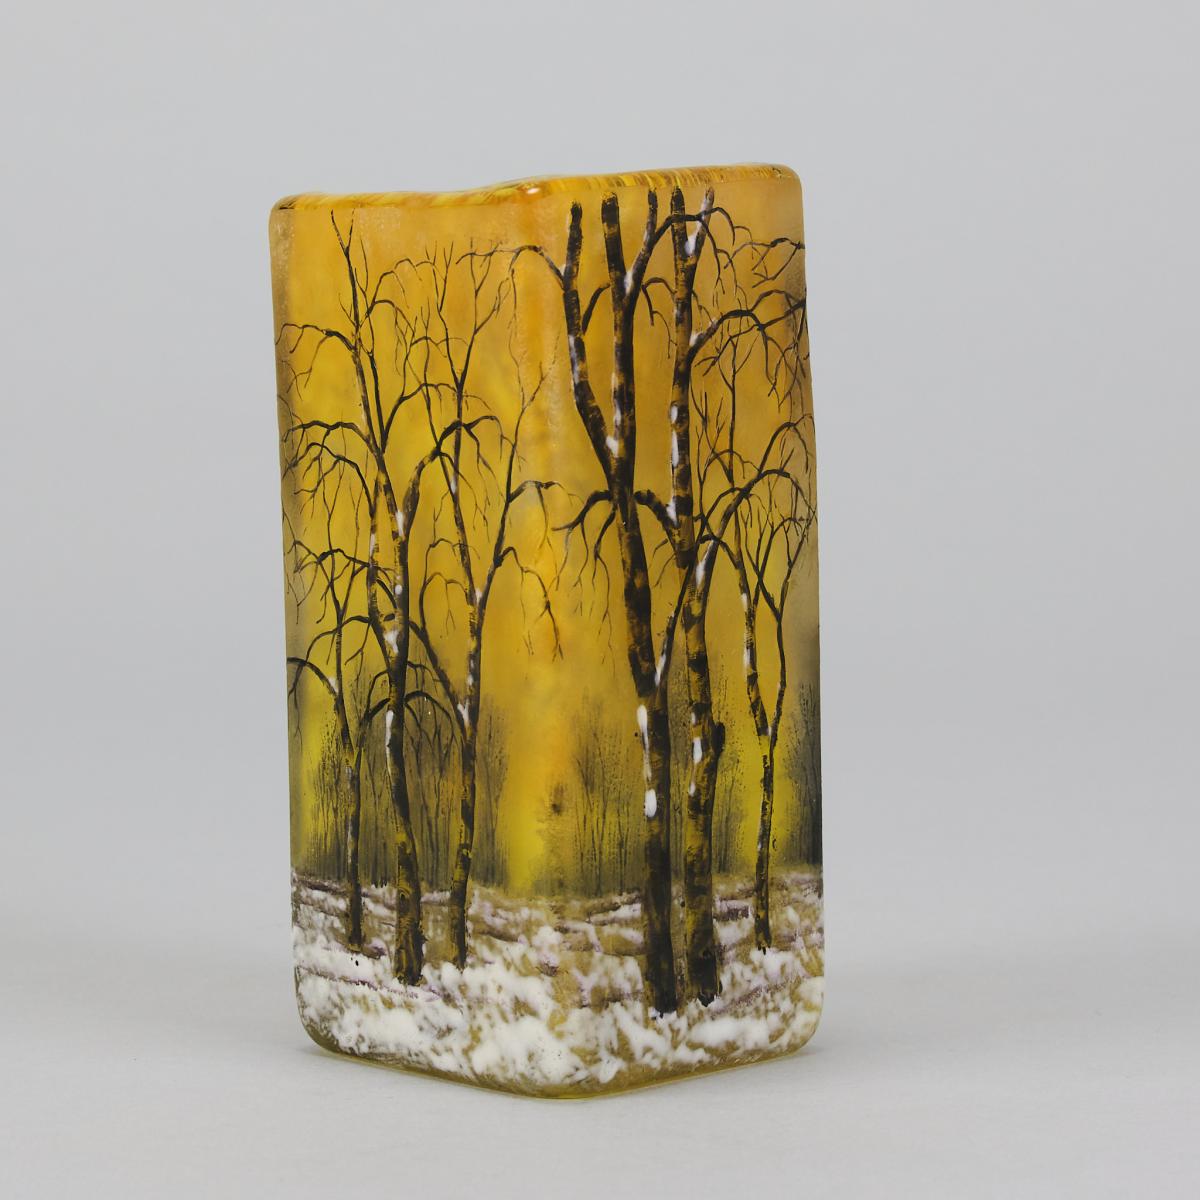 Early 20th Century Vase Entitled "Winter Vase" by Daum Frère, Circa 1900